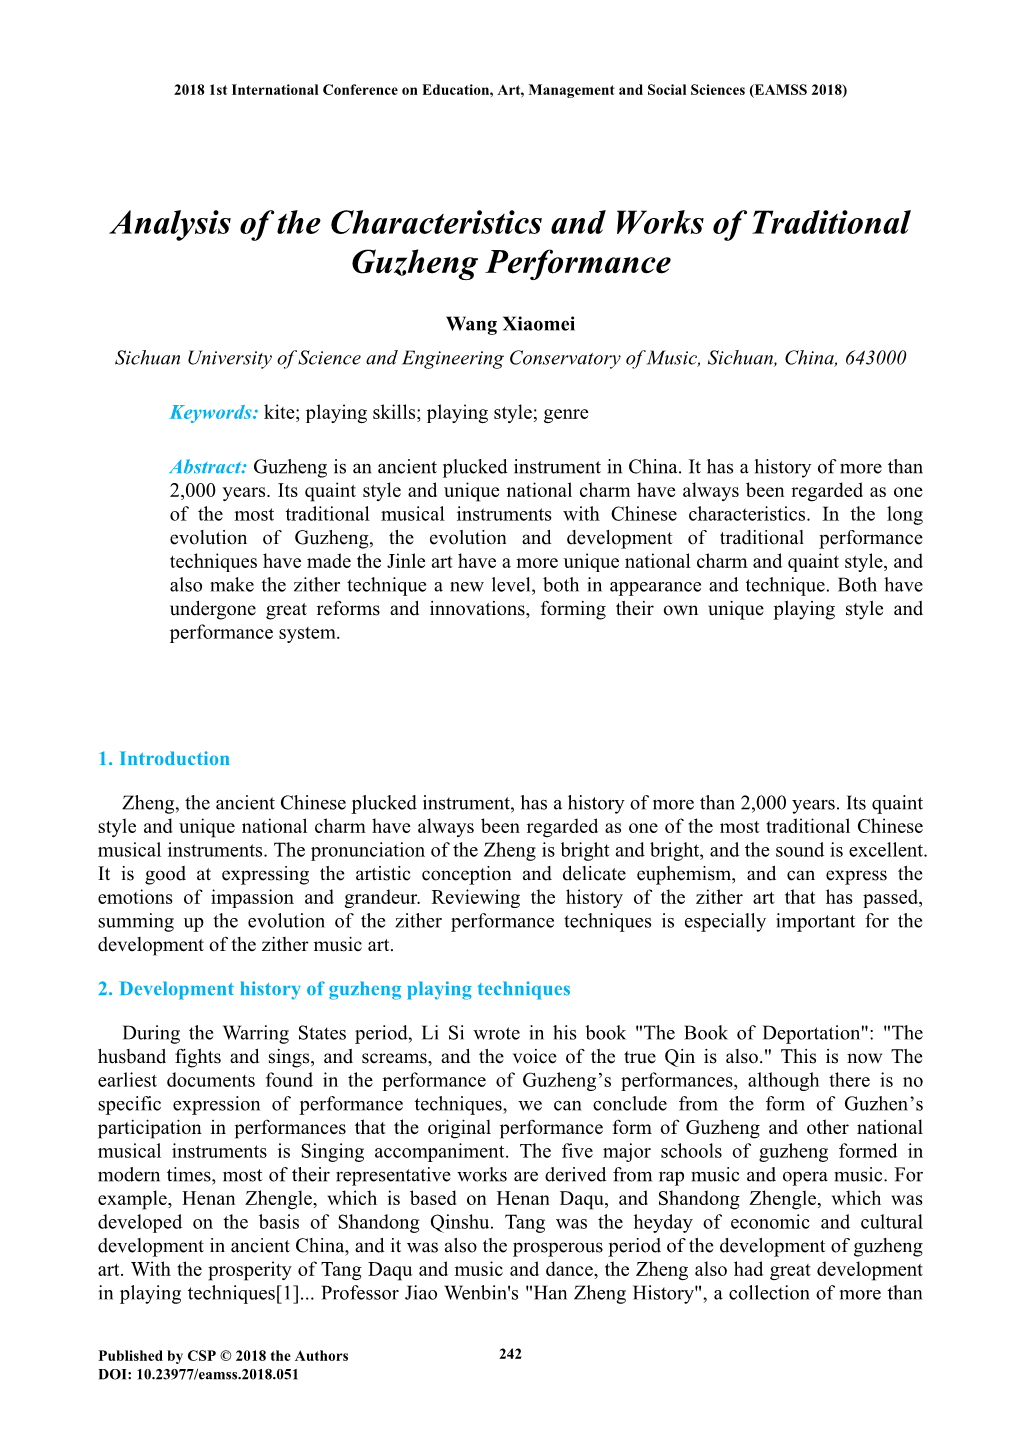 Analysis of the Characteristics and Works of Traditional Guzheng Performance